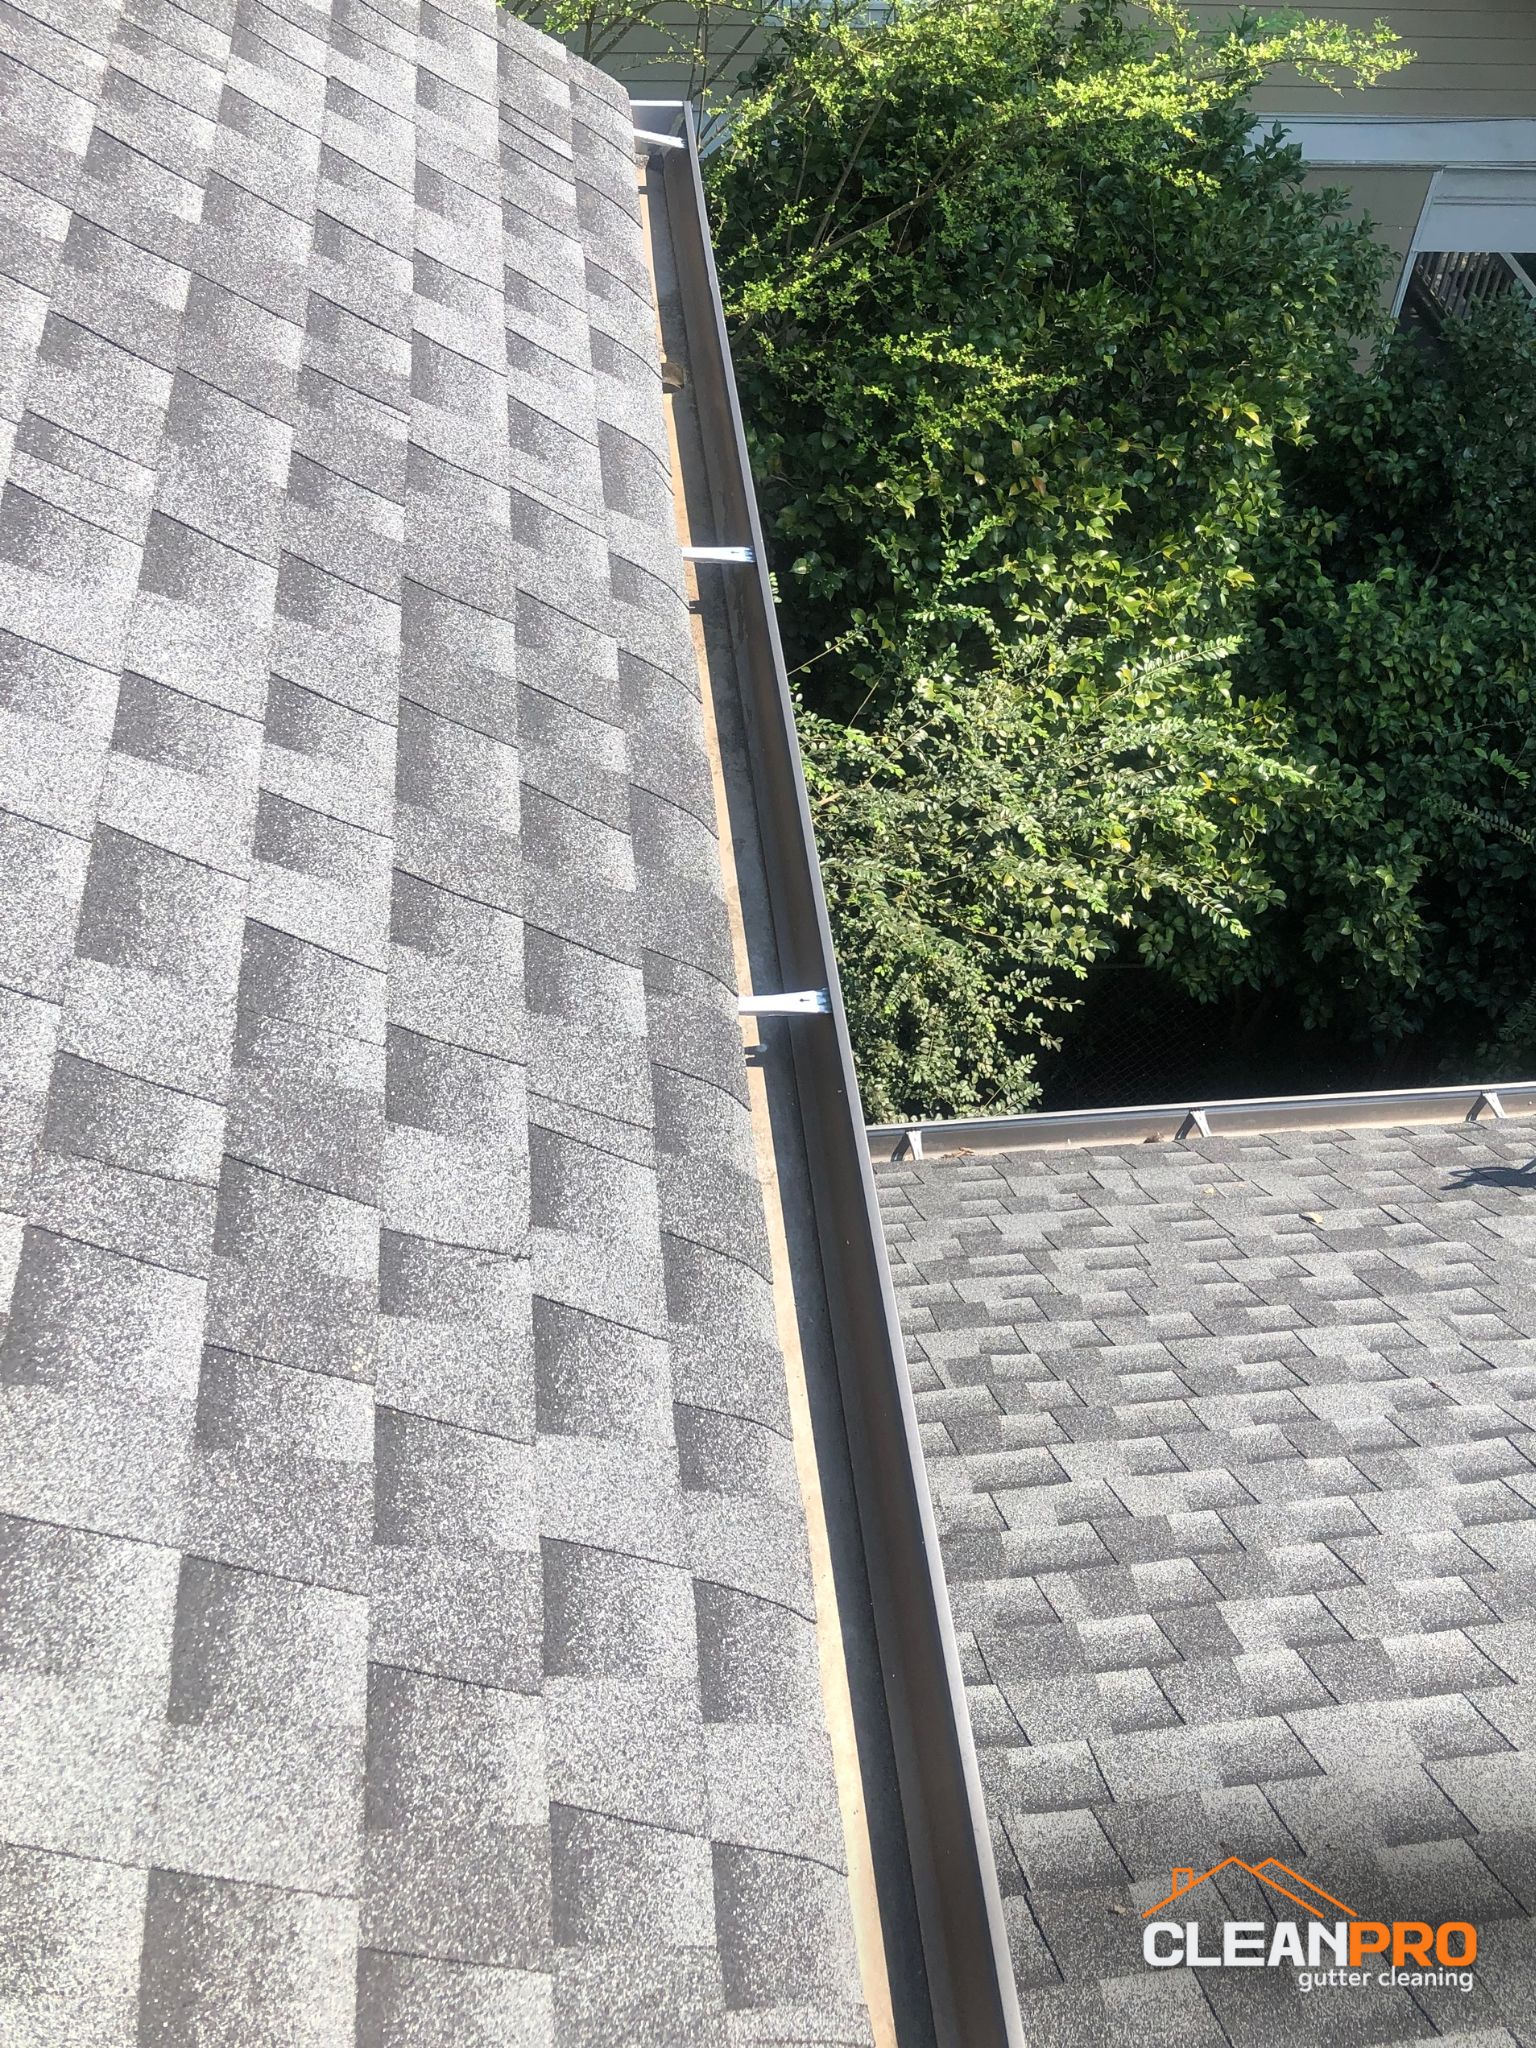 Residential Gutter Cleaning in Lawrence KS